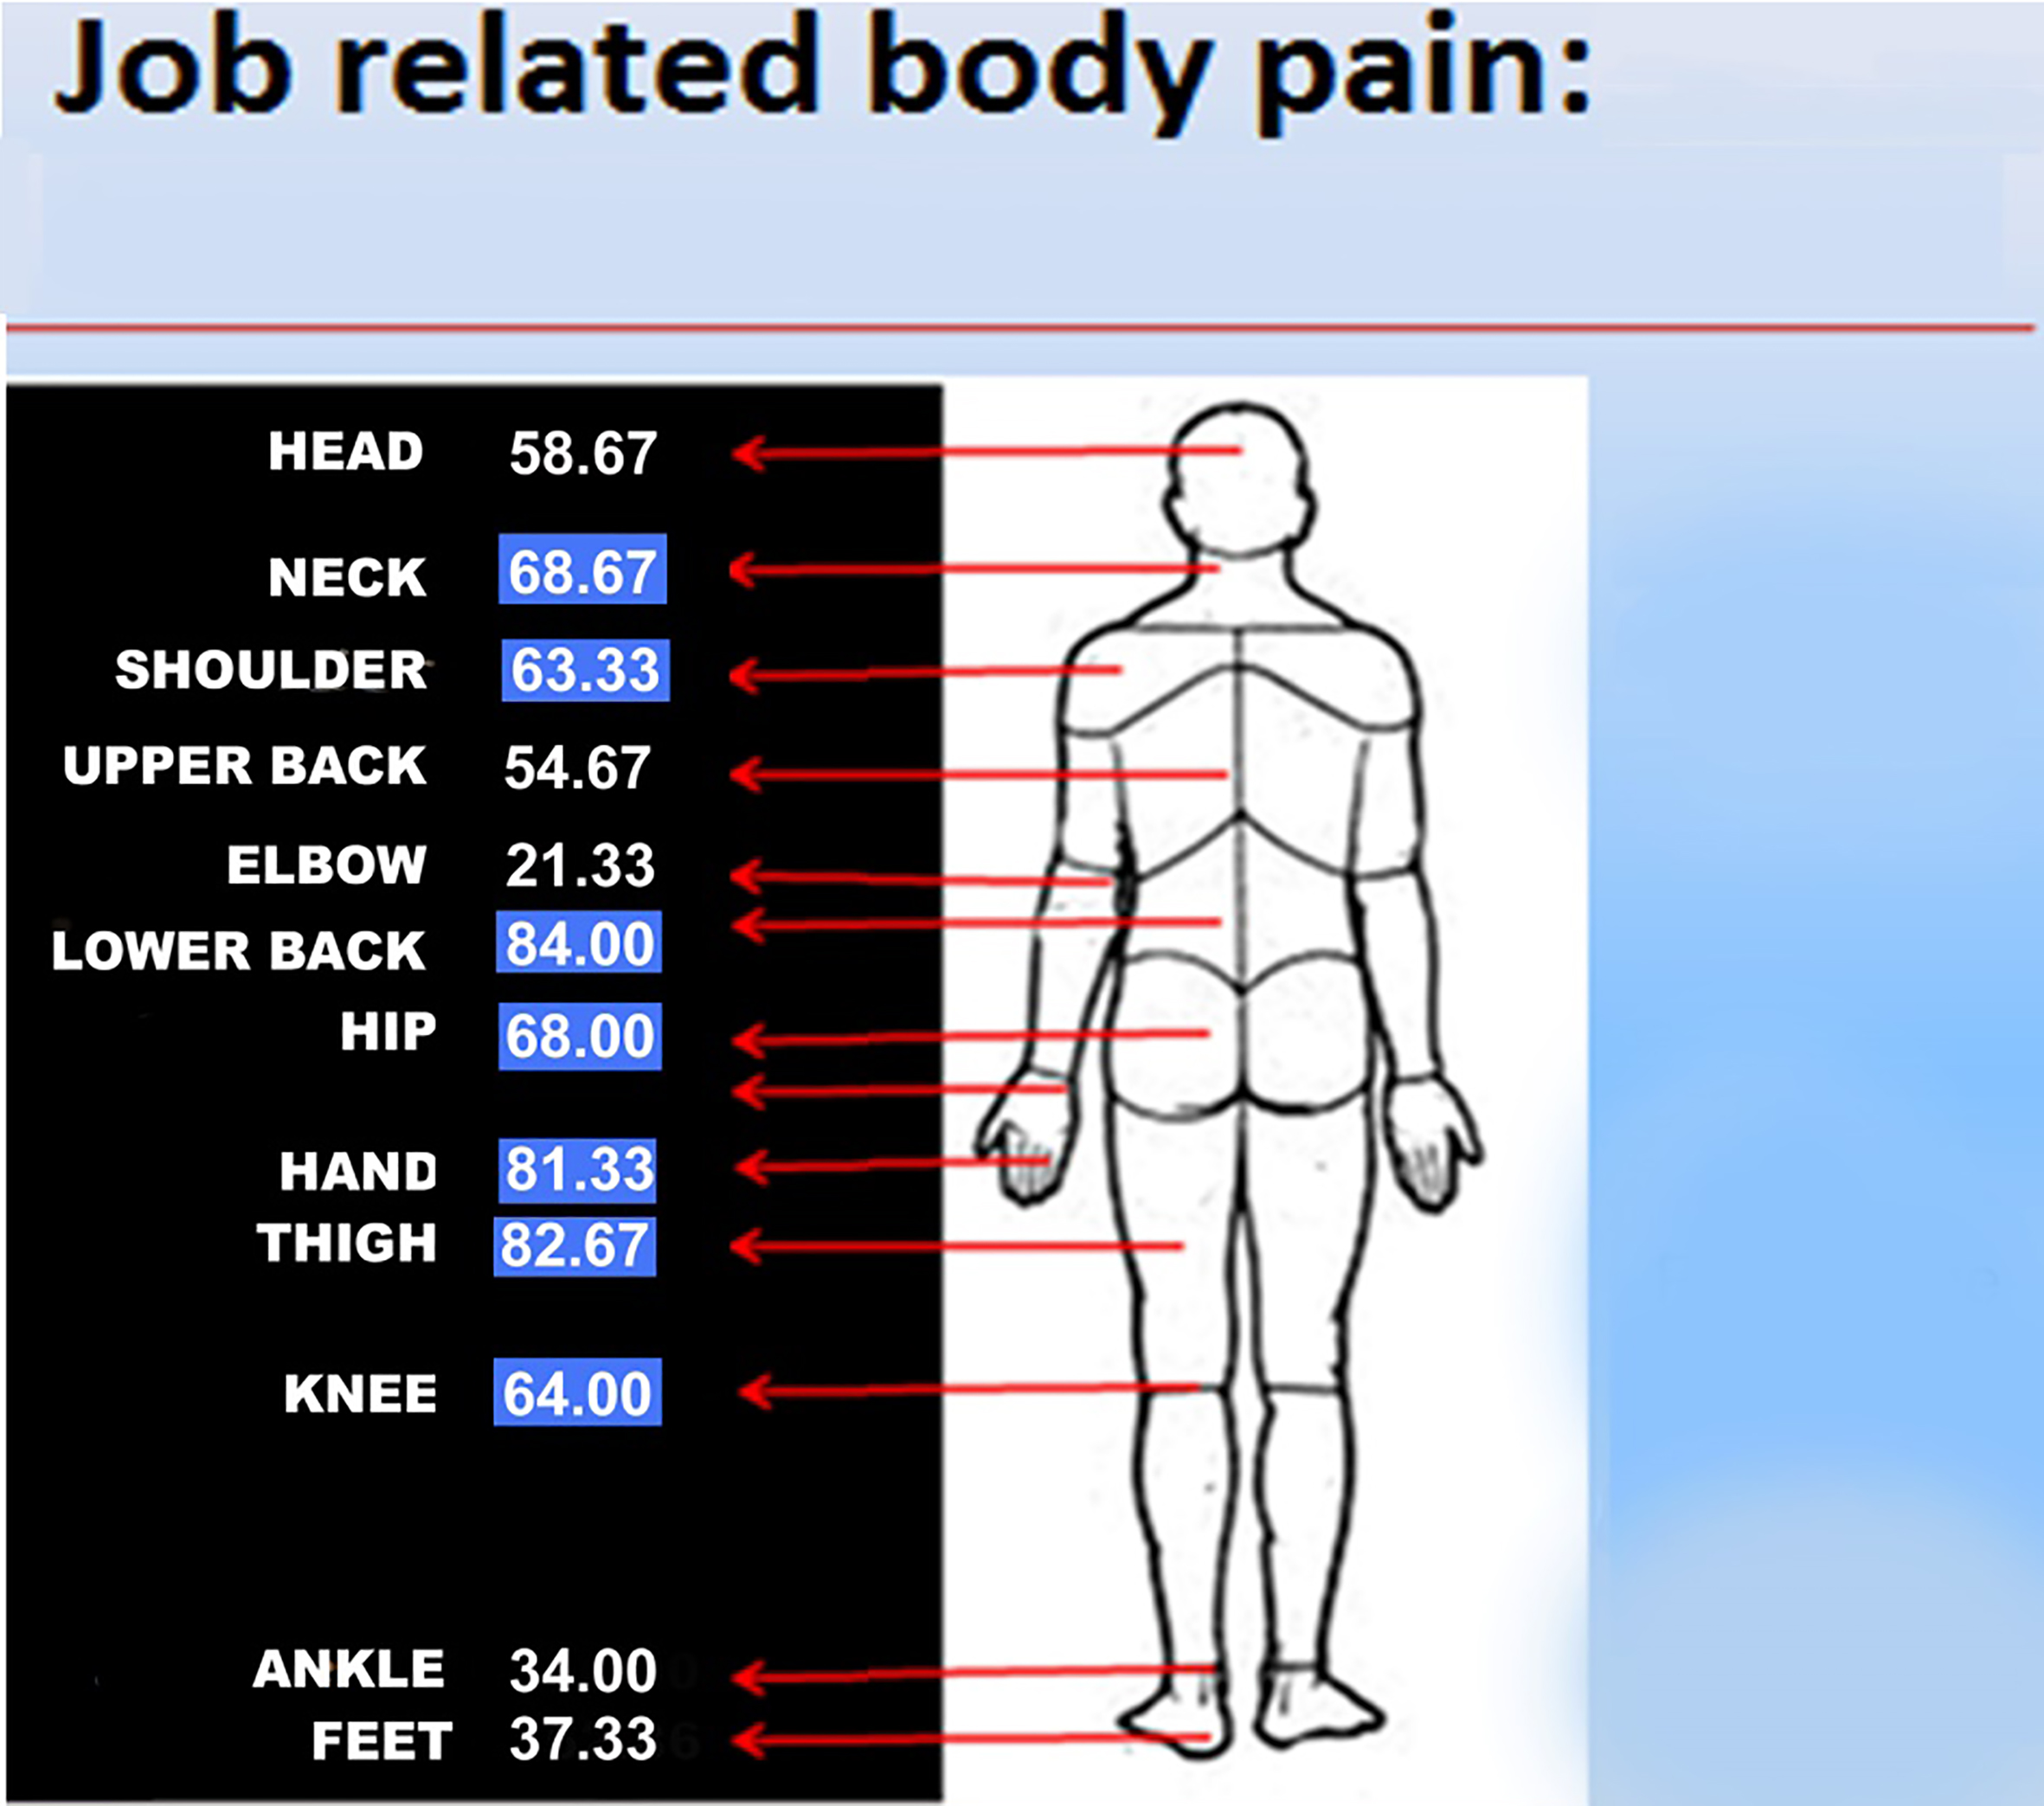 Percentage of motorbike riders experienced pain in different body parts (adapted from Nordic questionnaire).